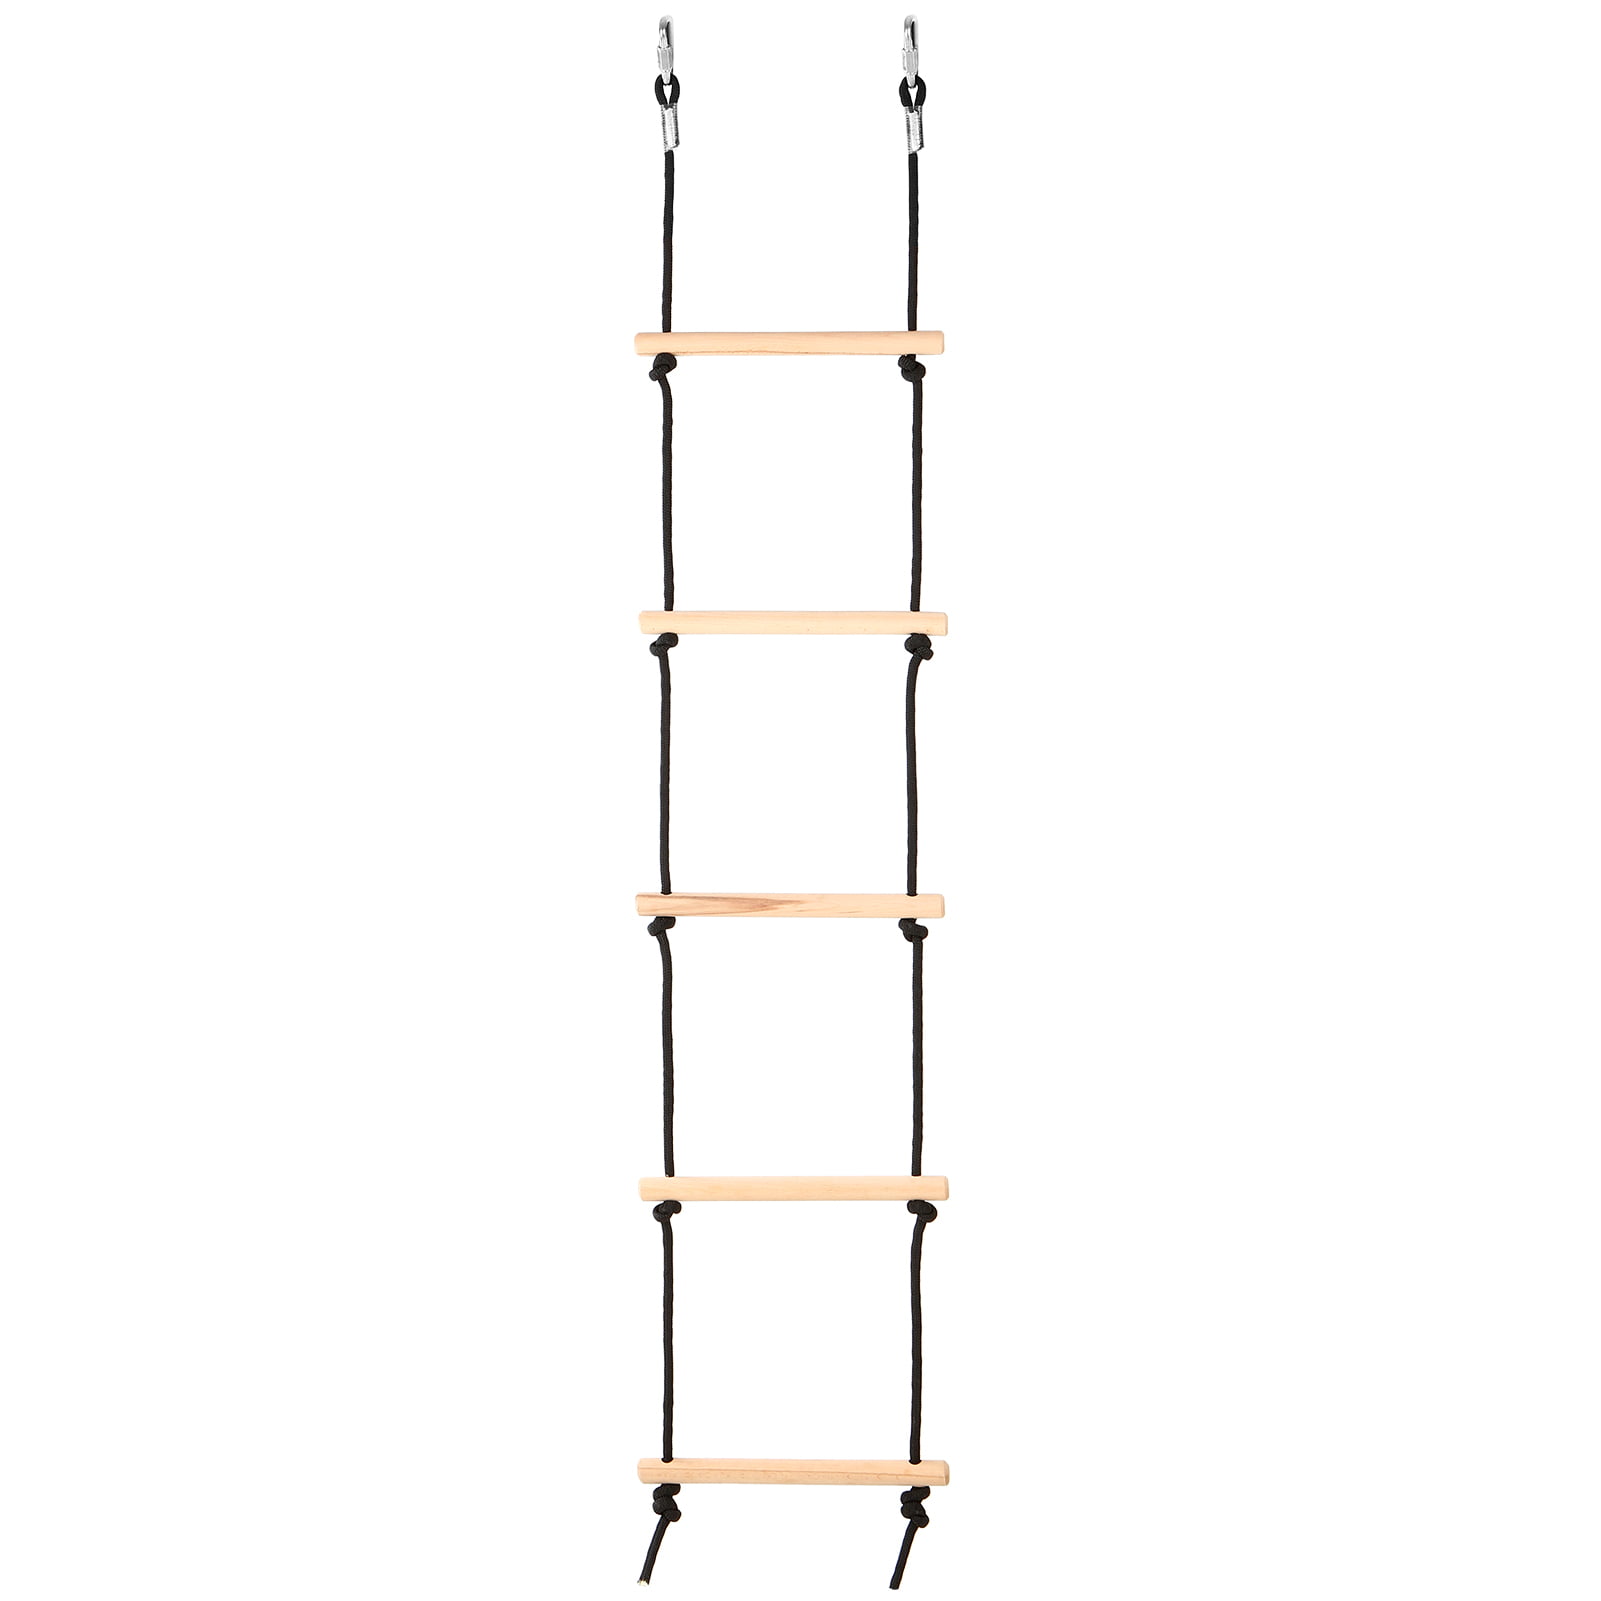 100kg Wood Rope Ladder for Child Outdoor Climbing Frame Tree House 2 Metal Hooks 